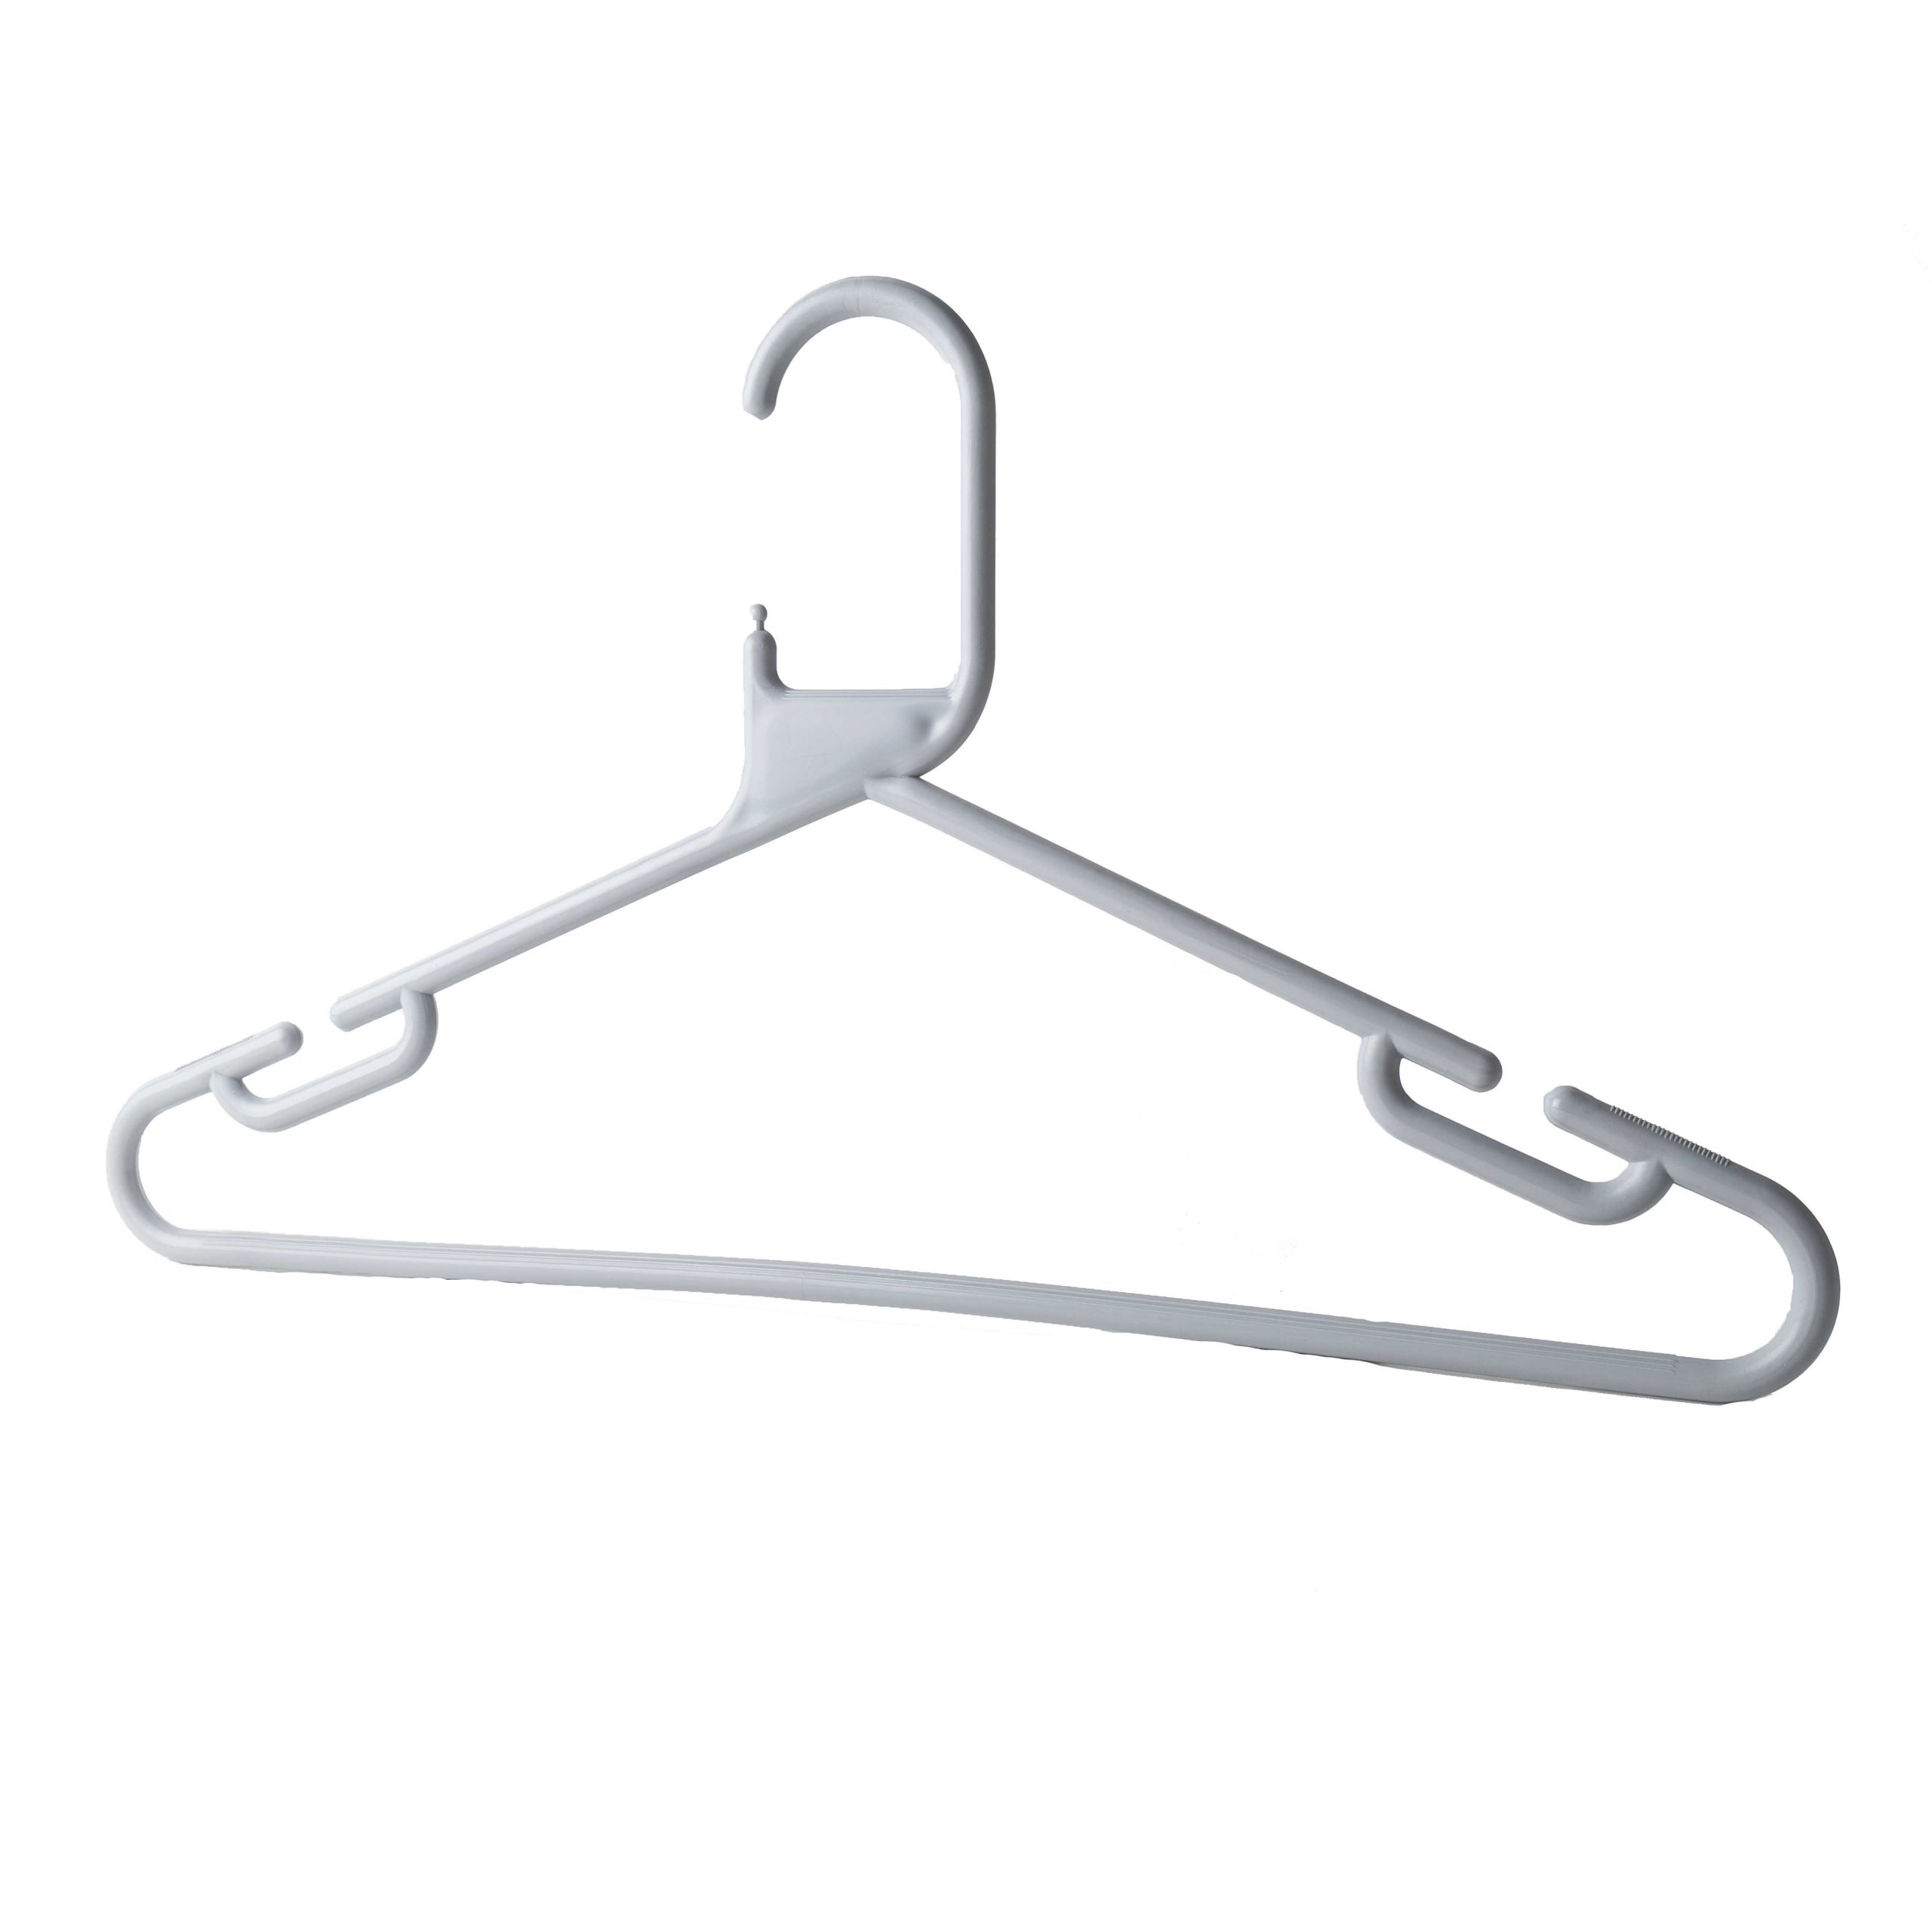 Caraselle 4x Plastic Hangers x3 Red 43cm 